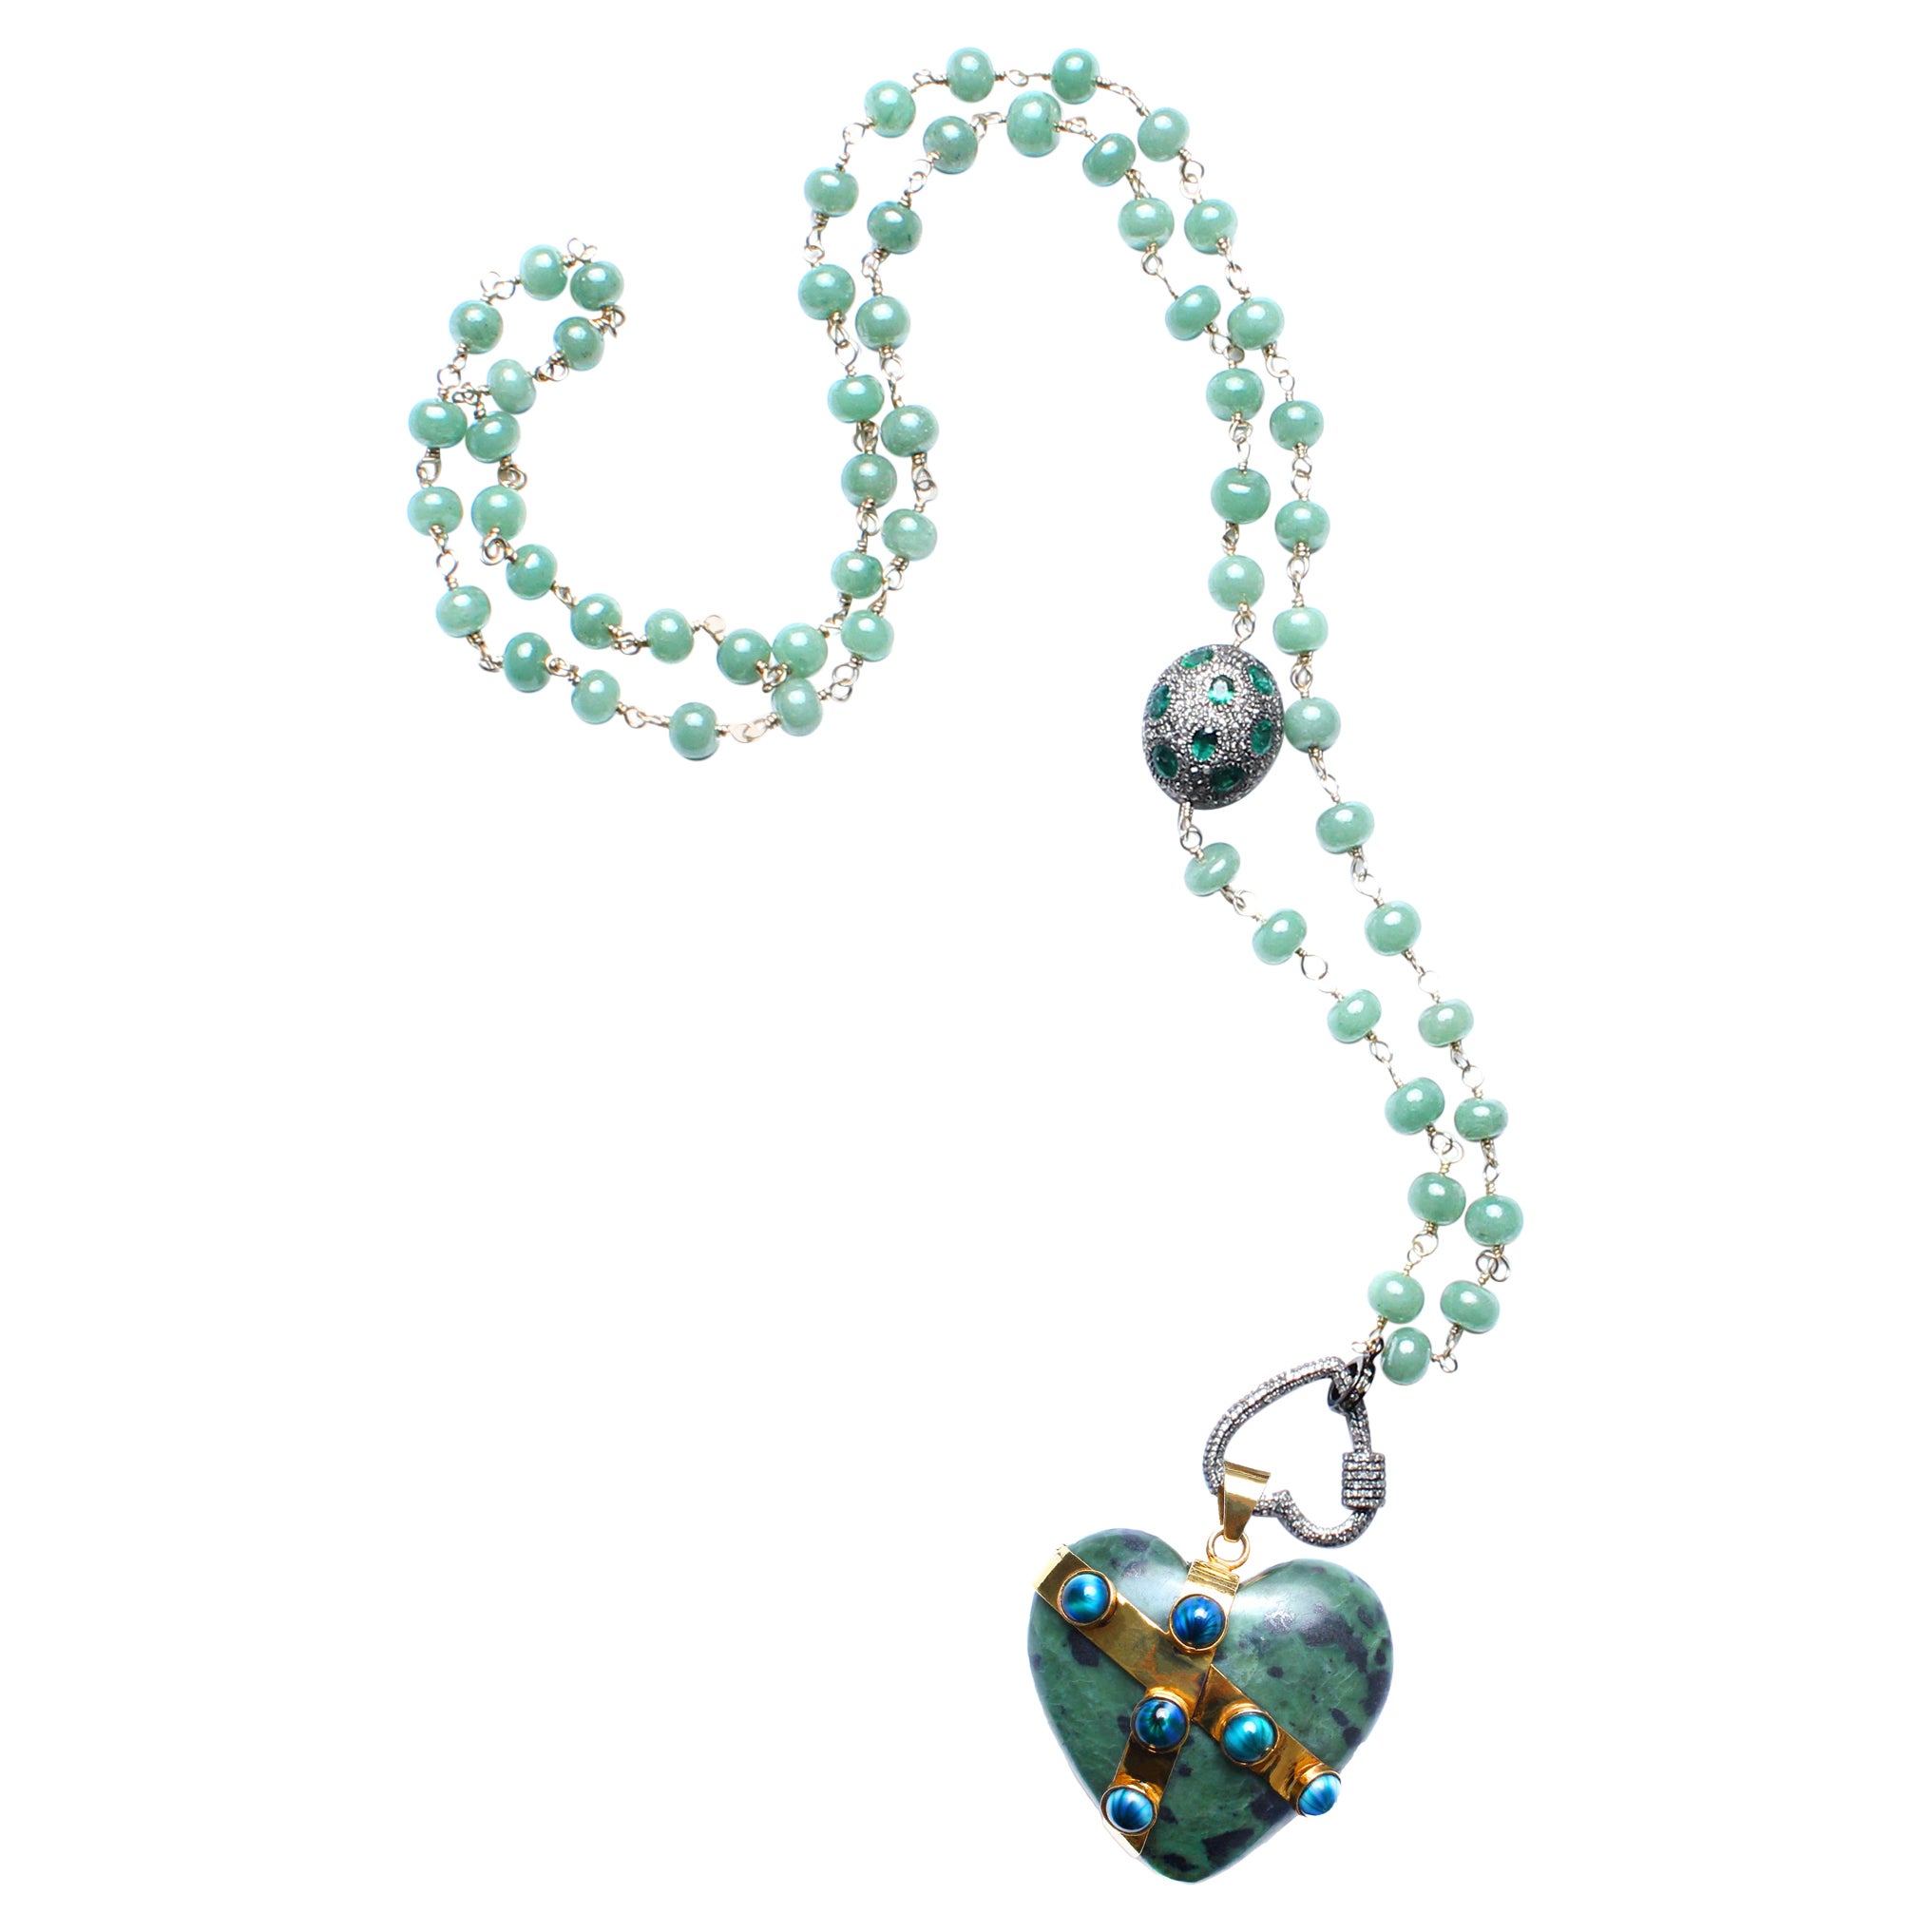 Clarissa Bronfman Agate Emerald Jade Chalcedony 14k Gold Heart Rosary Necklace